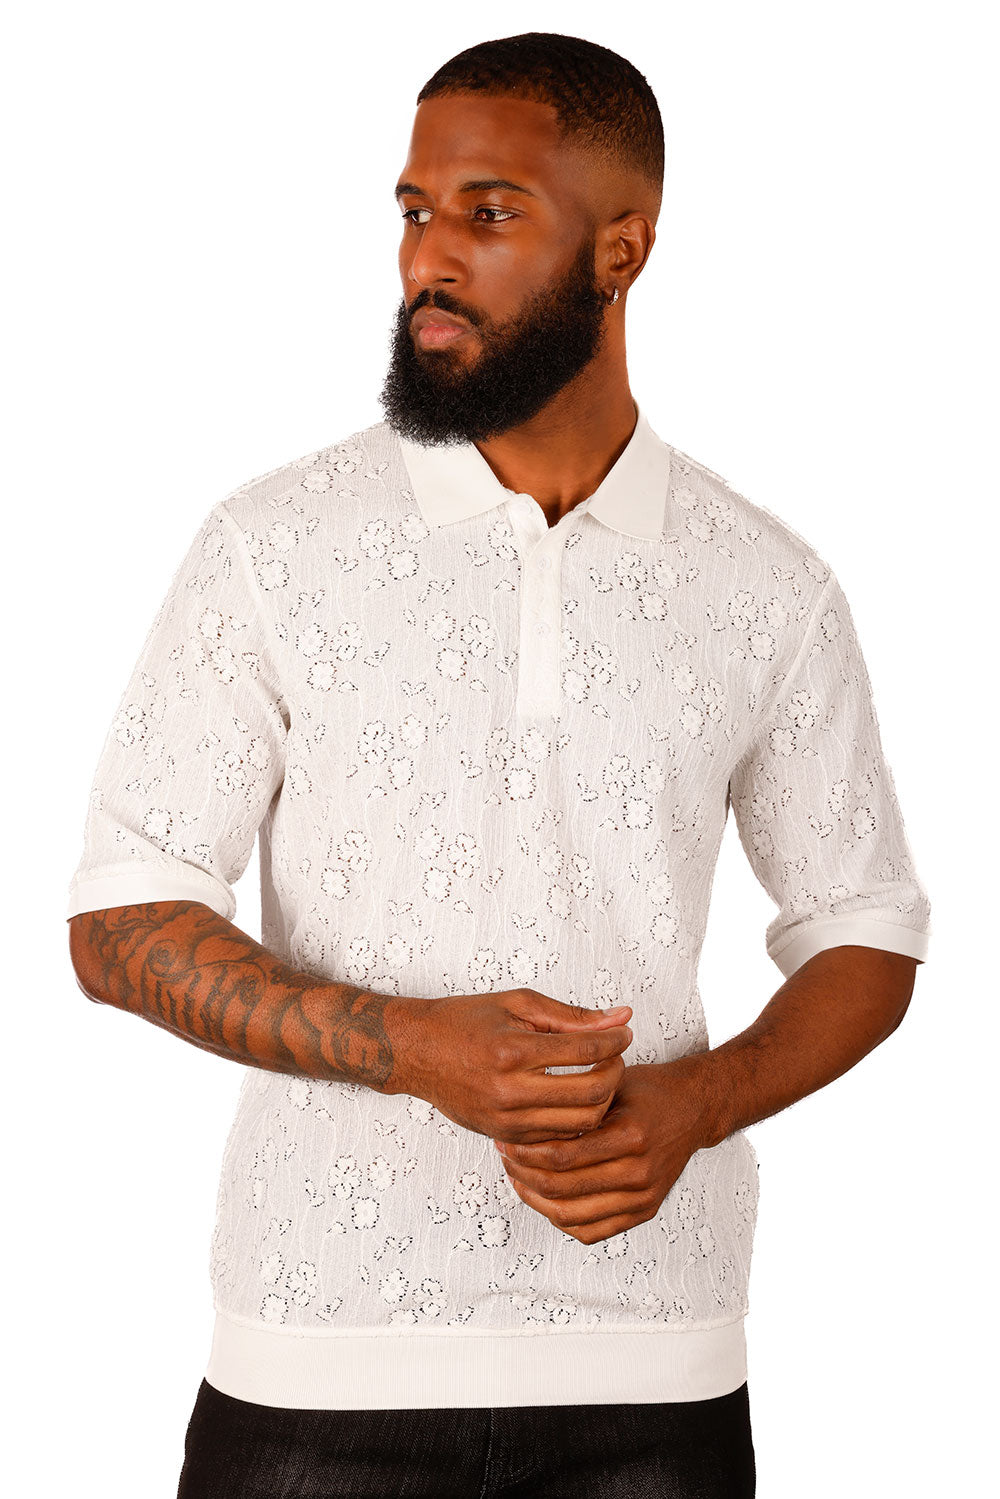 Barabas Men's French Crochet Floral Short Sleeve Polo Shirts 3P13 White 